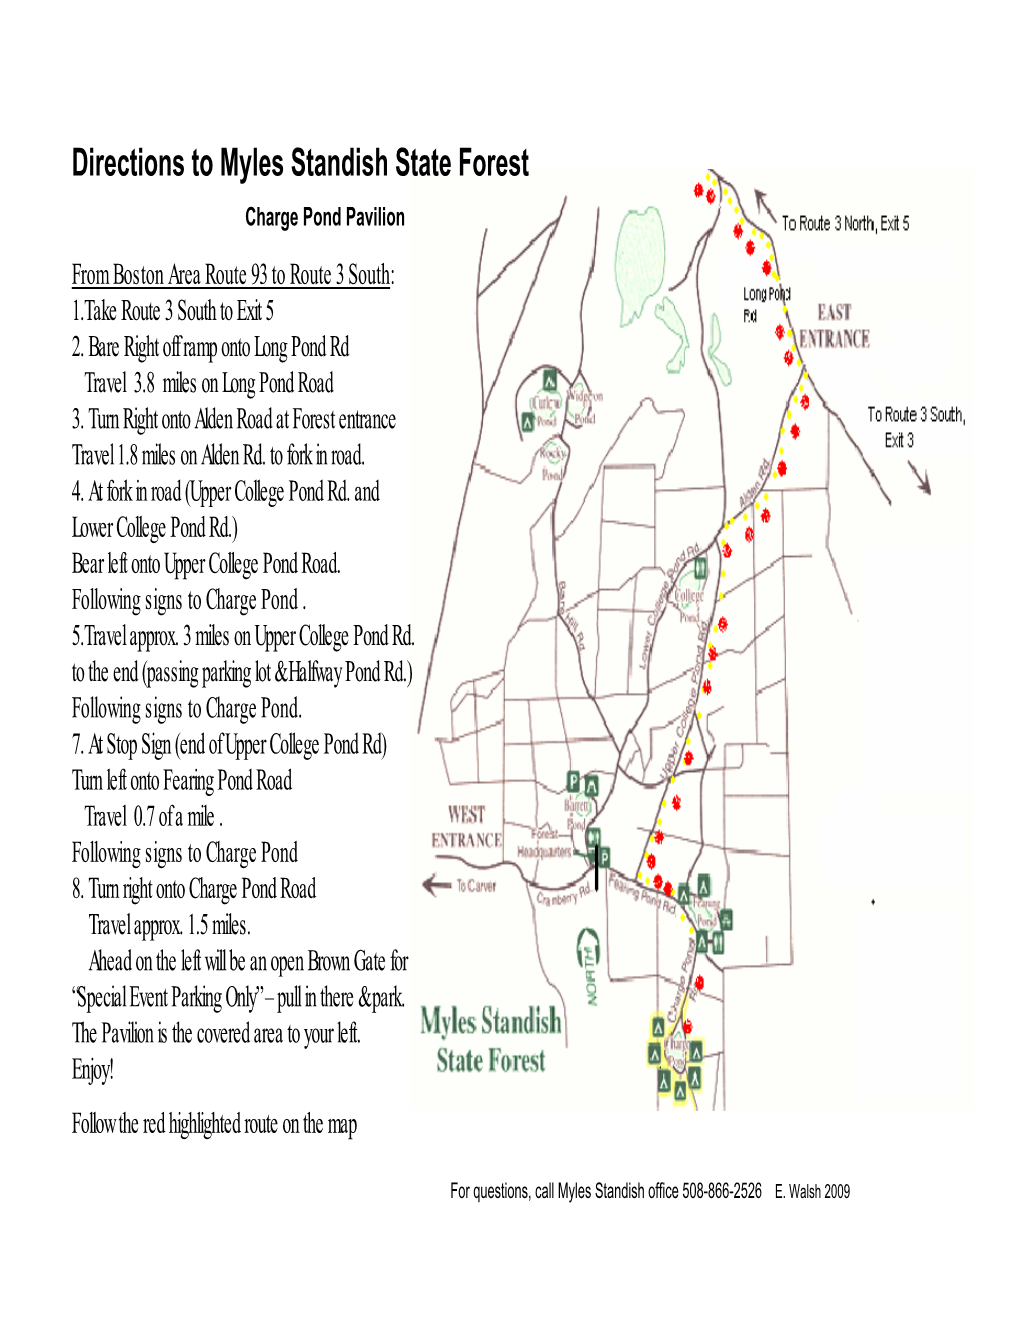 Directions to Myles Standish State Forest Charge Pond Pavilion from Boston Area Route 93 to Route 3 South: 1.Take Route 3 South to Exit 5 2